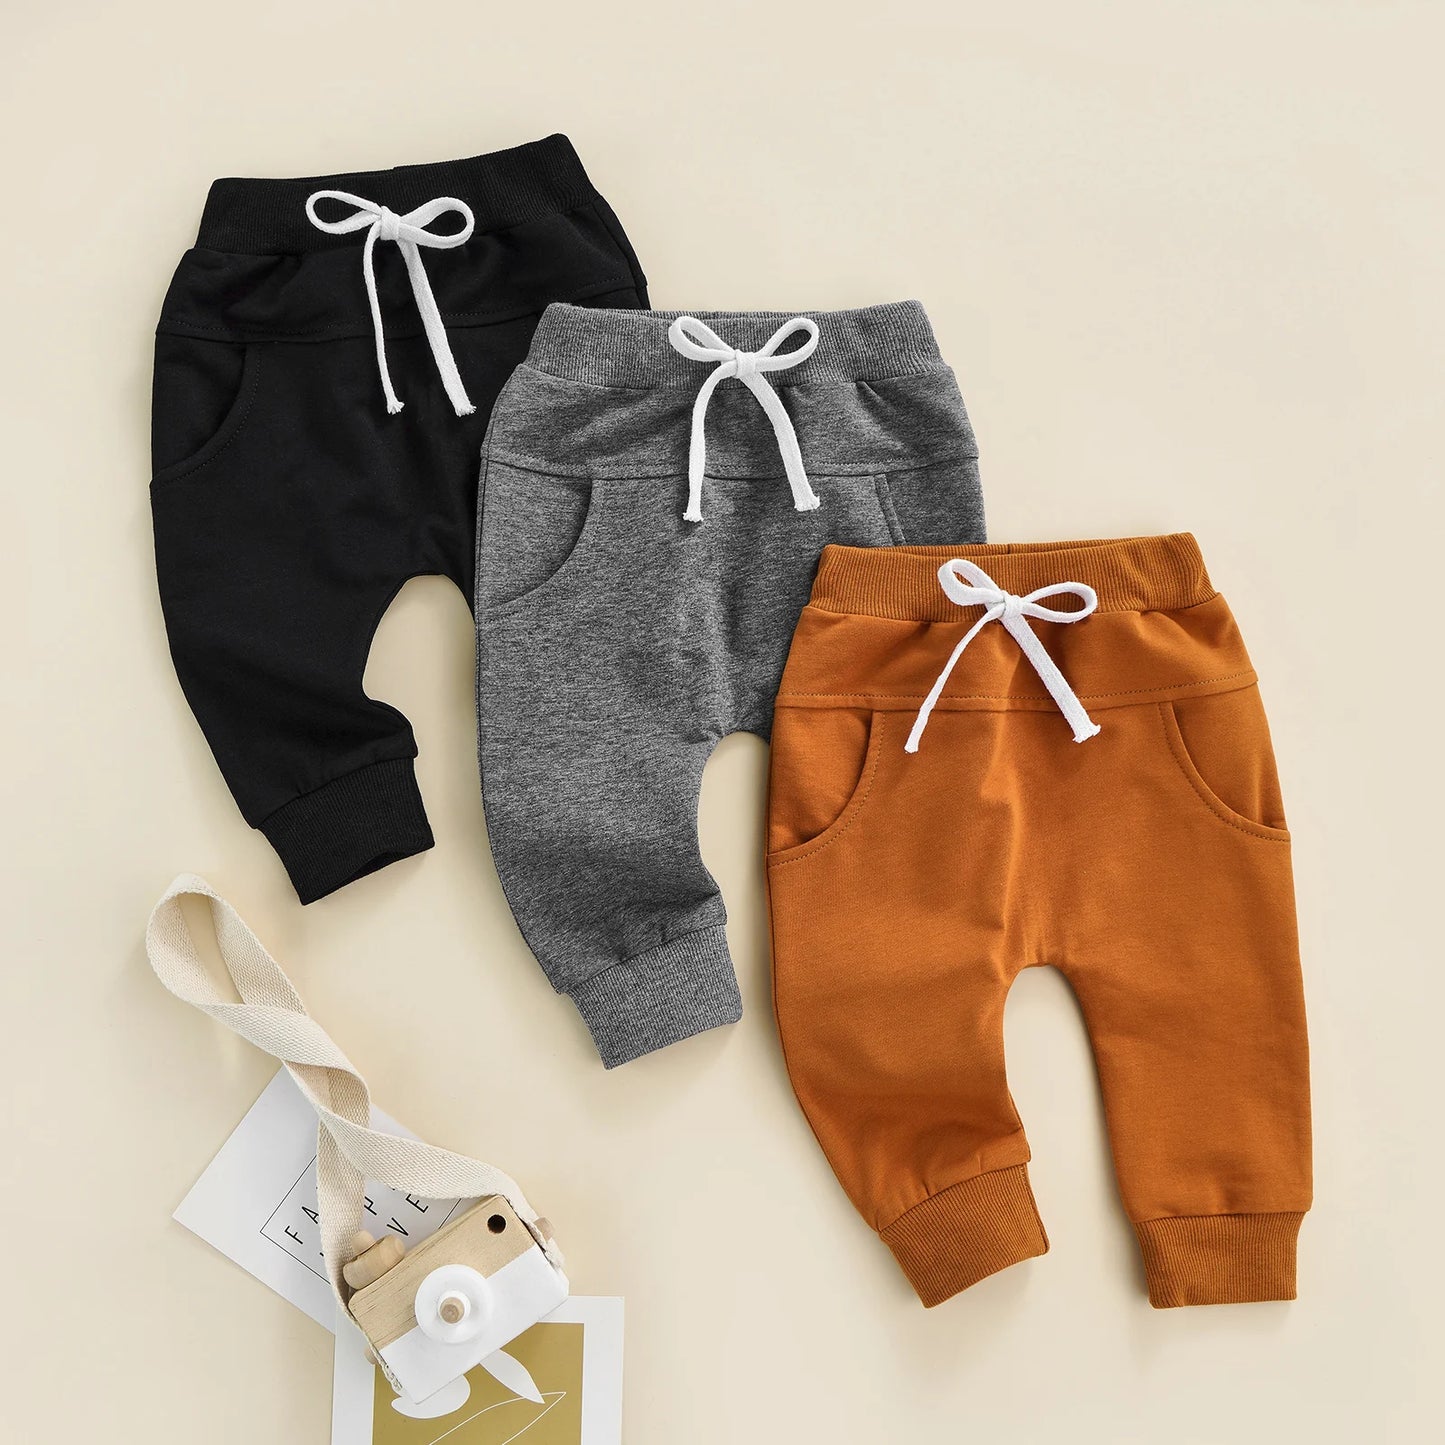 Newborn Baby loose fit Trousers